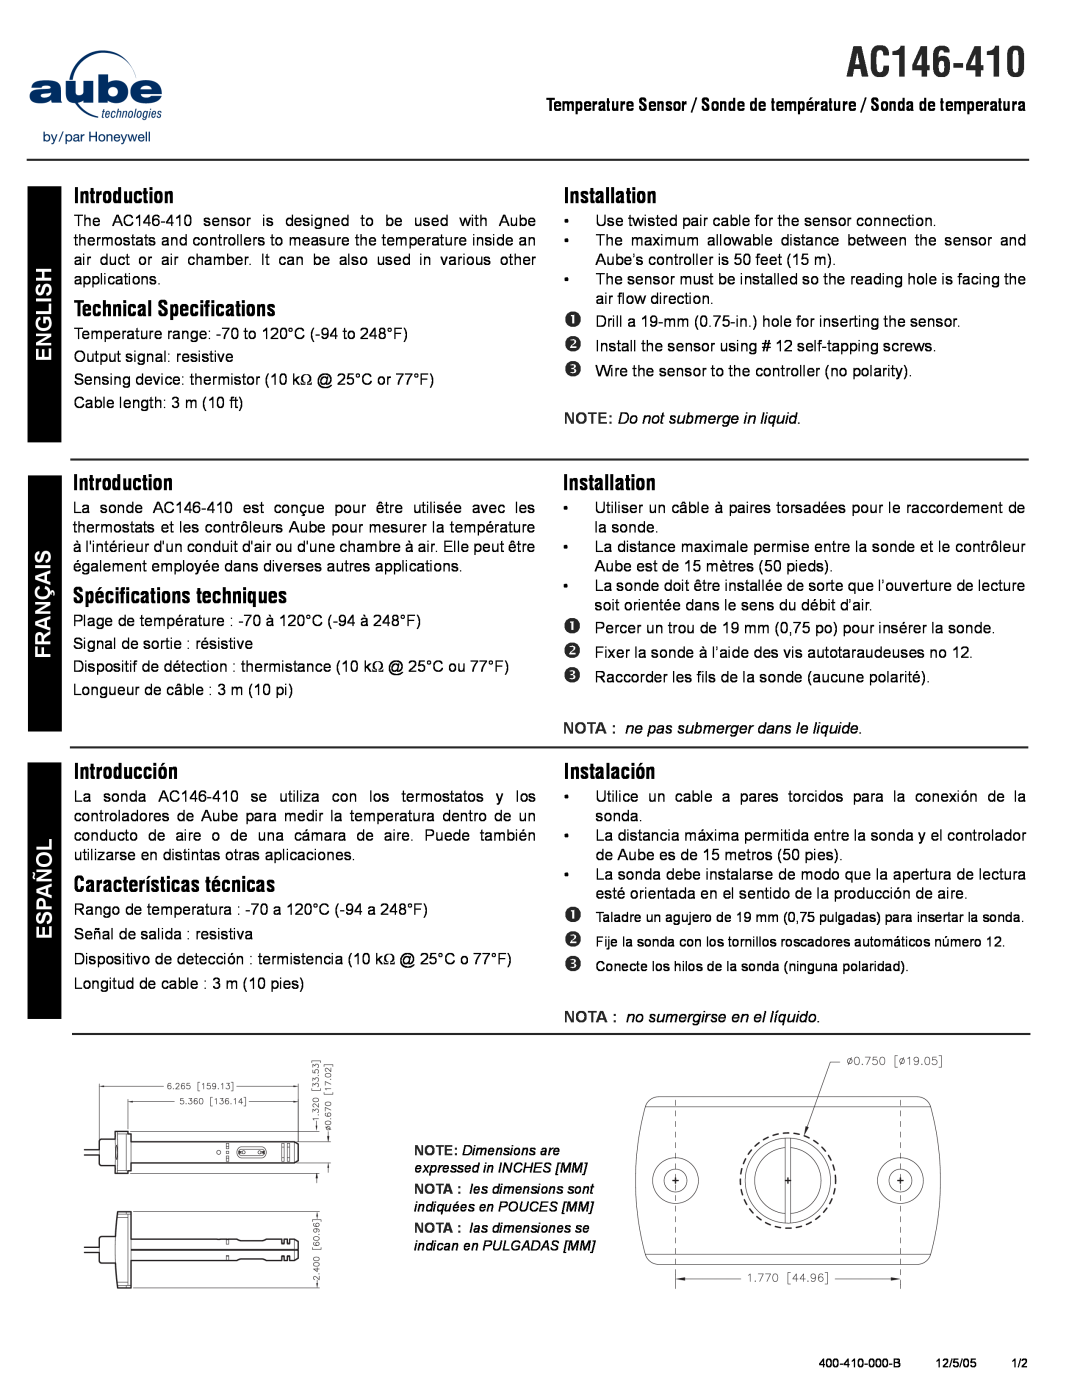 Aube Technologies AC146-410 technical specifications English, Introduction, Technical Specifications, Installation 